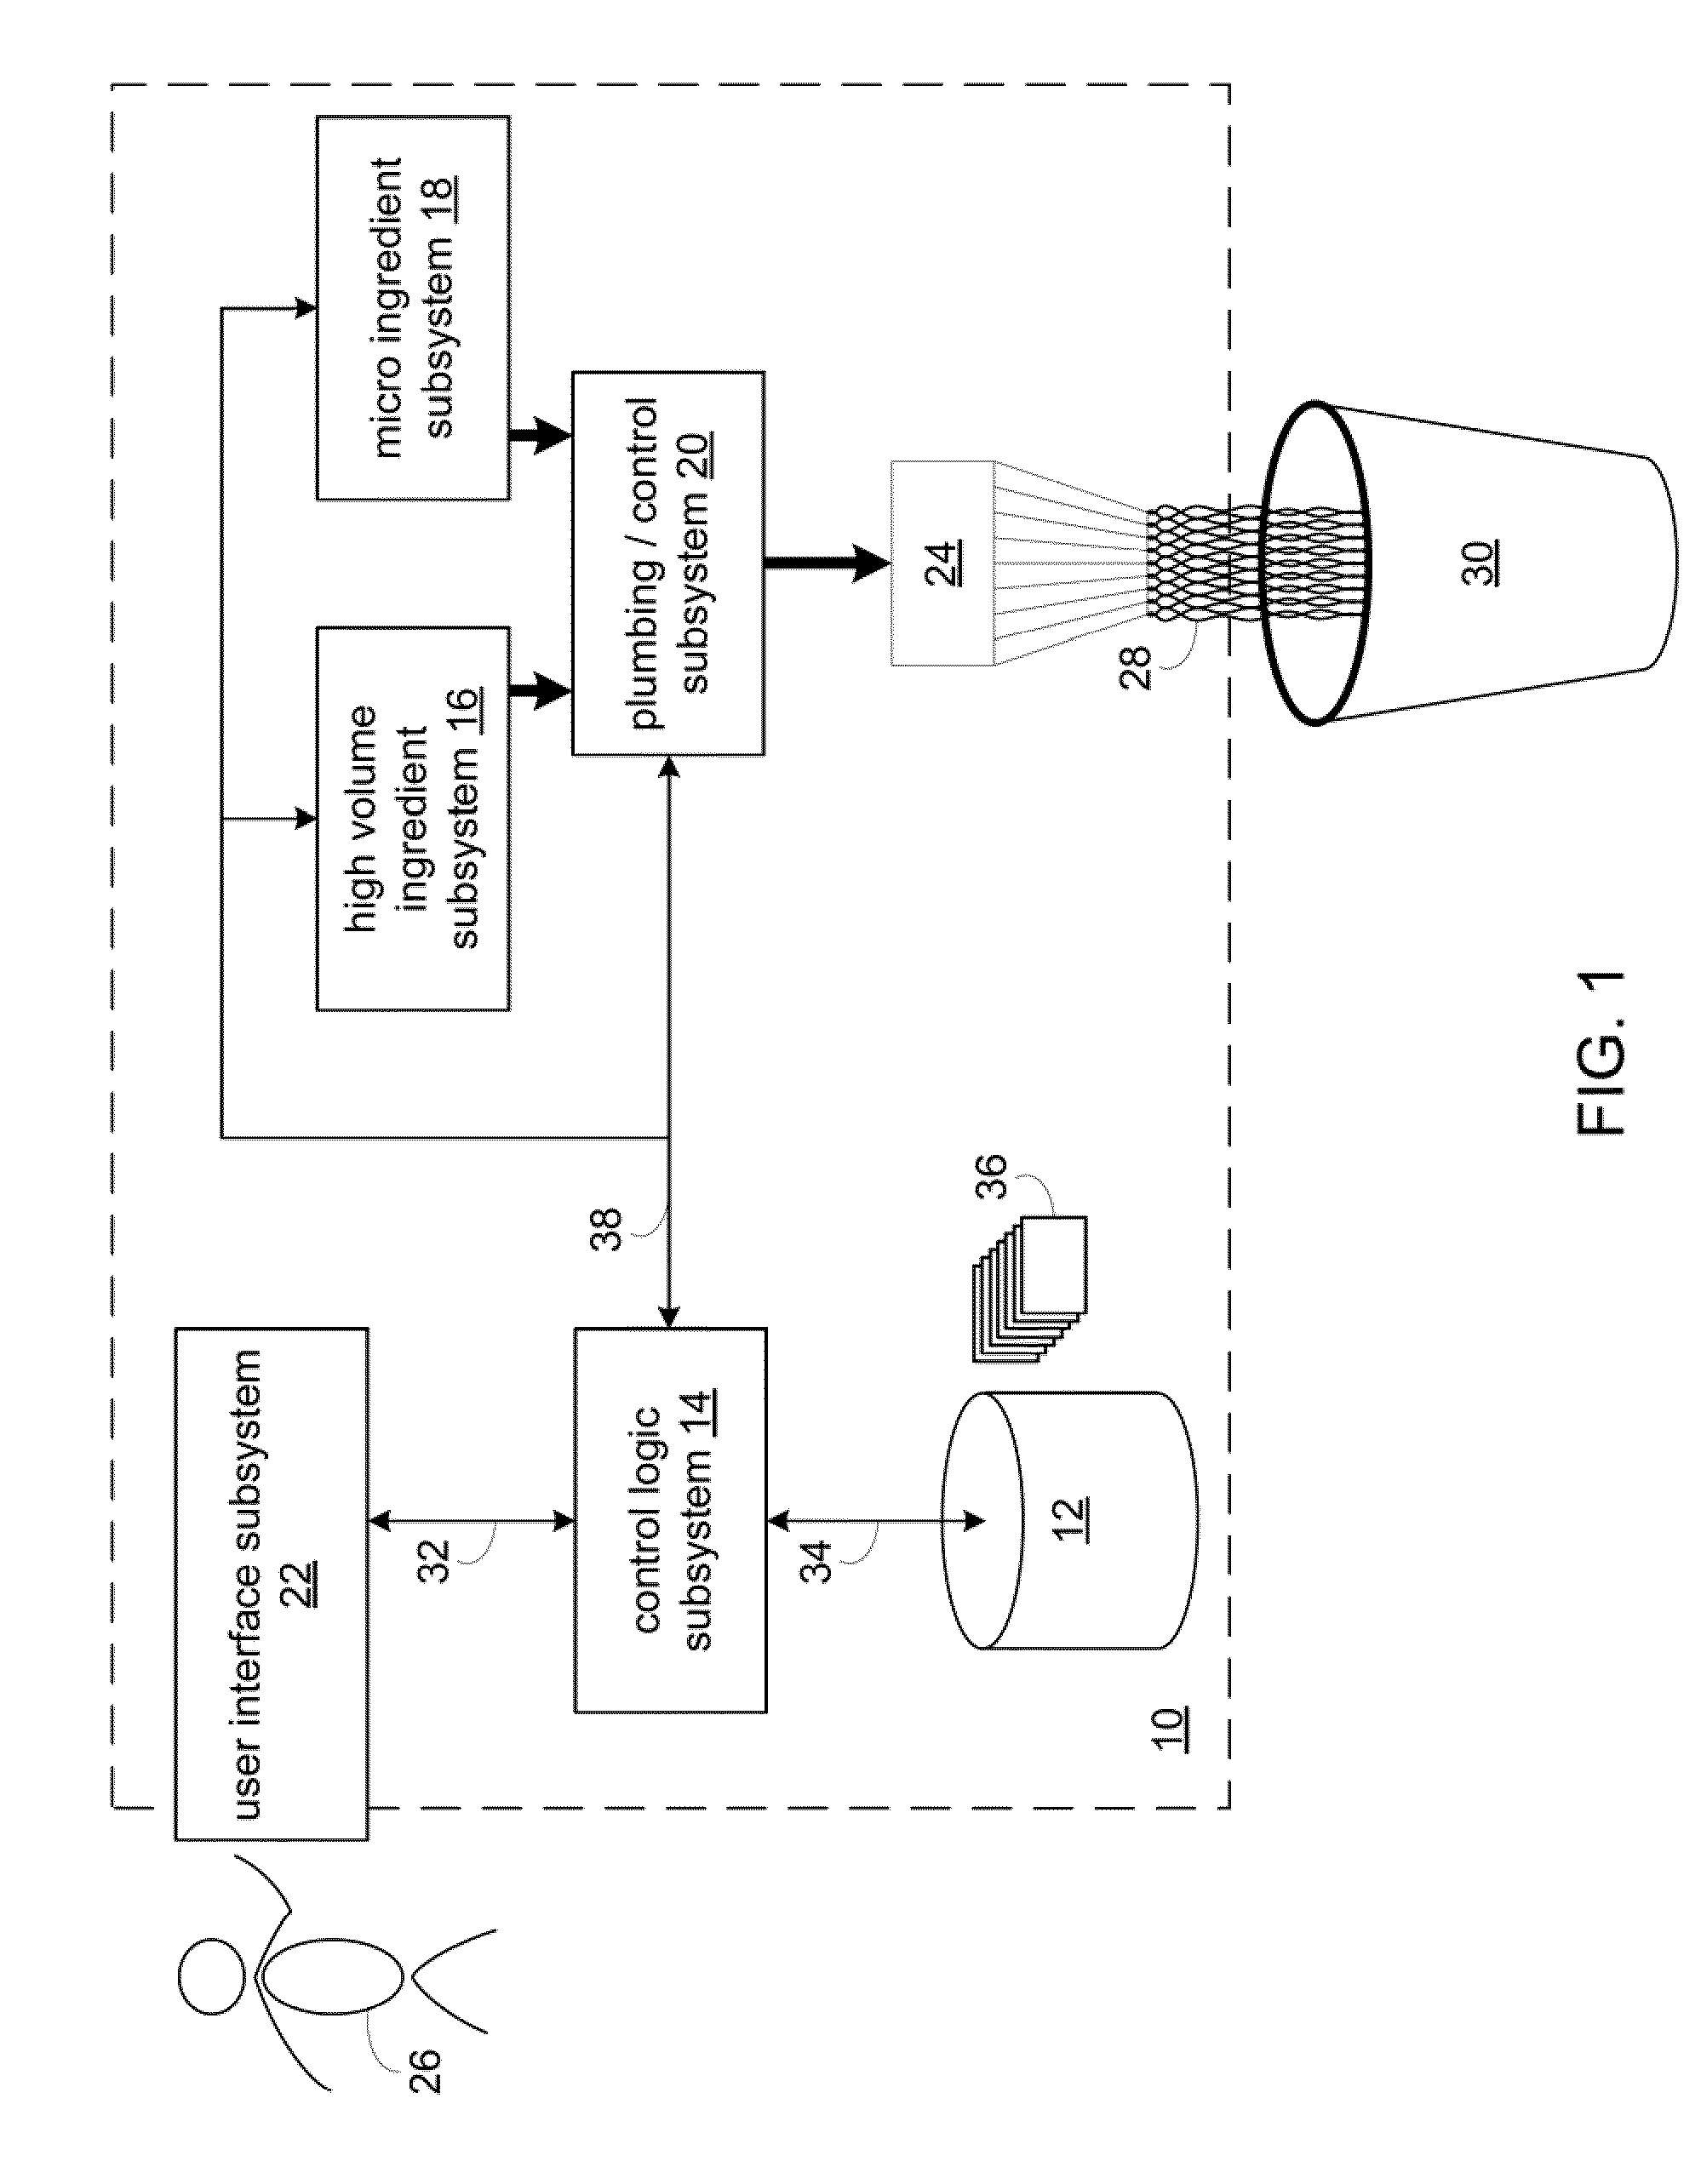 RFID system with an eddy current trap